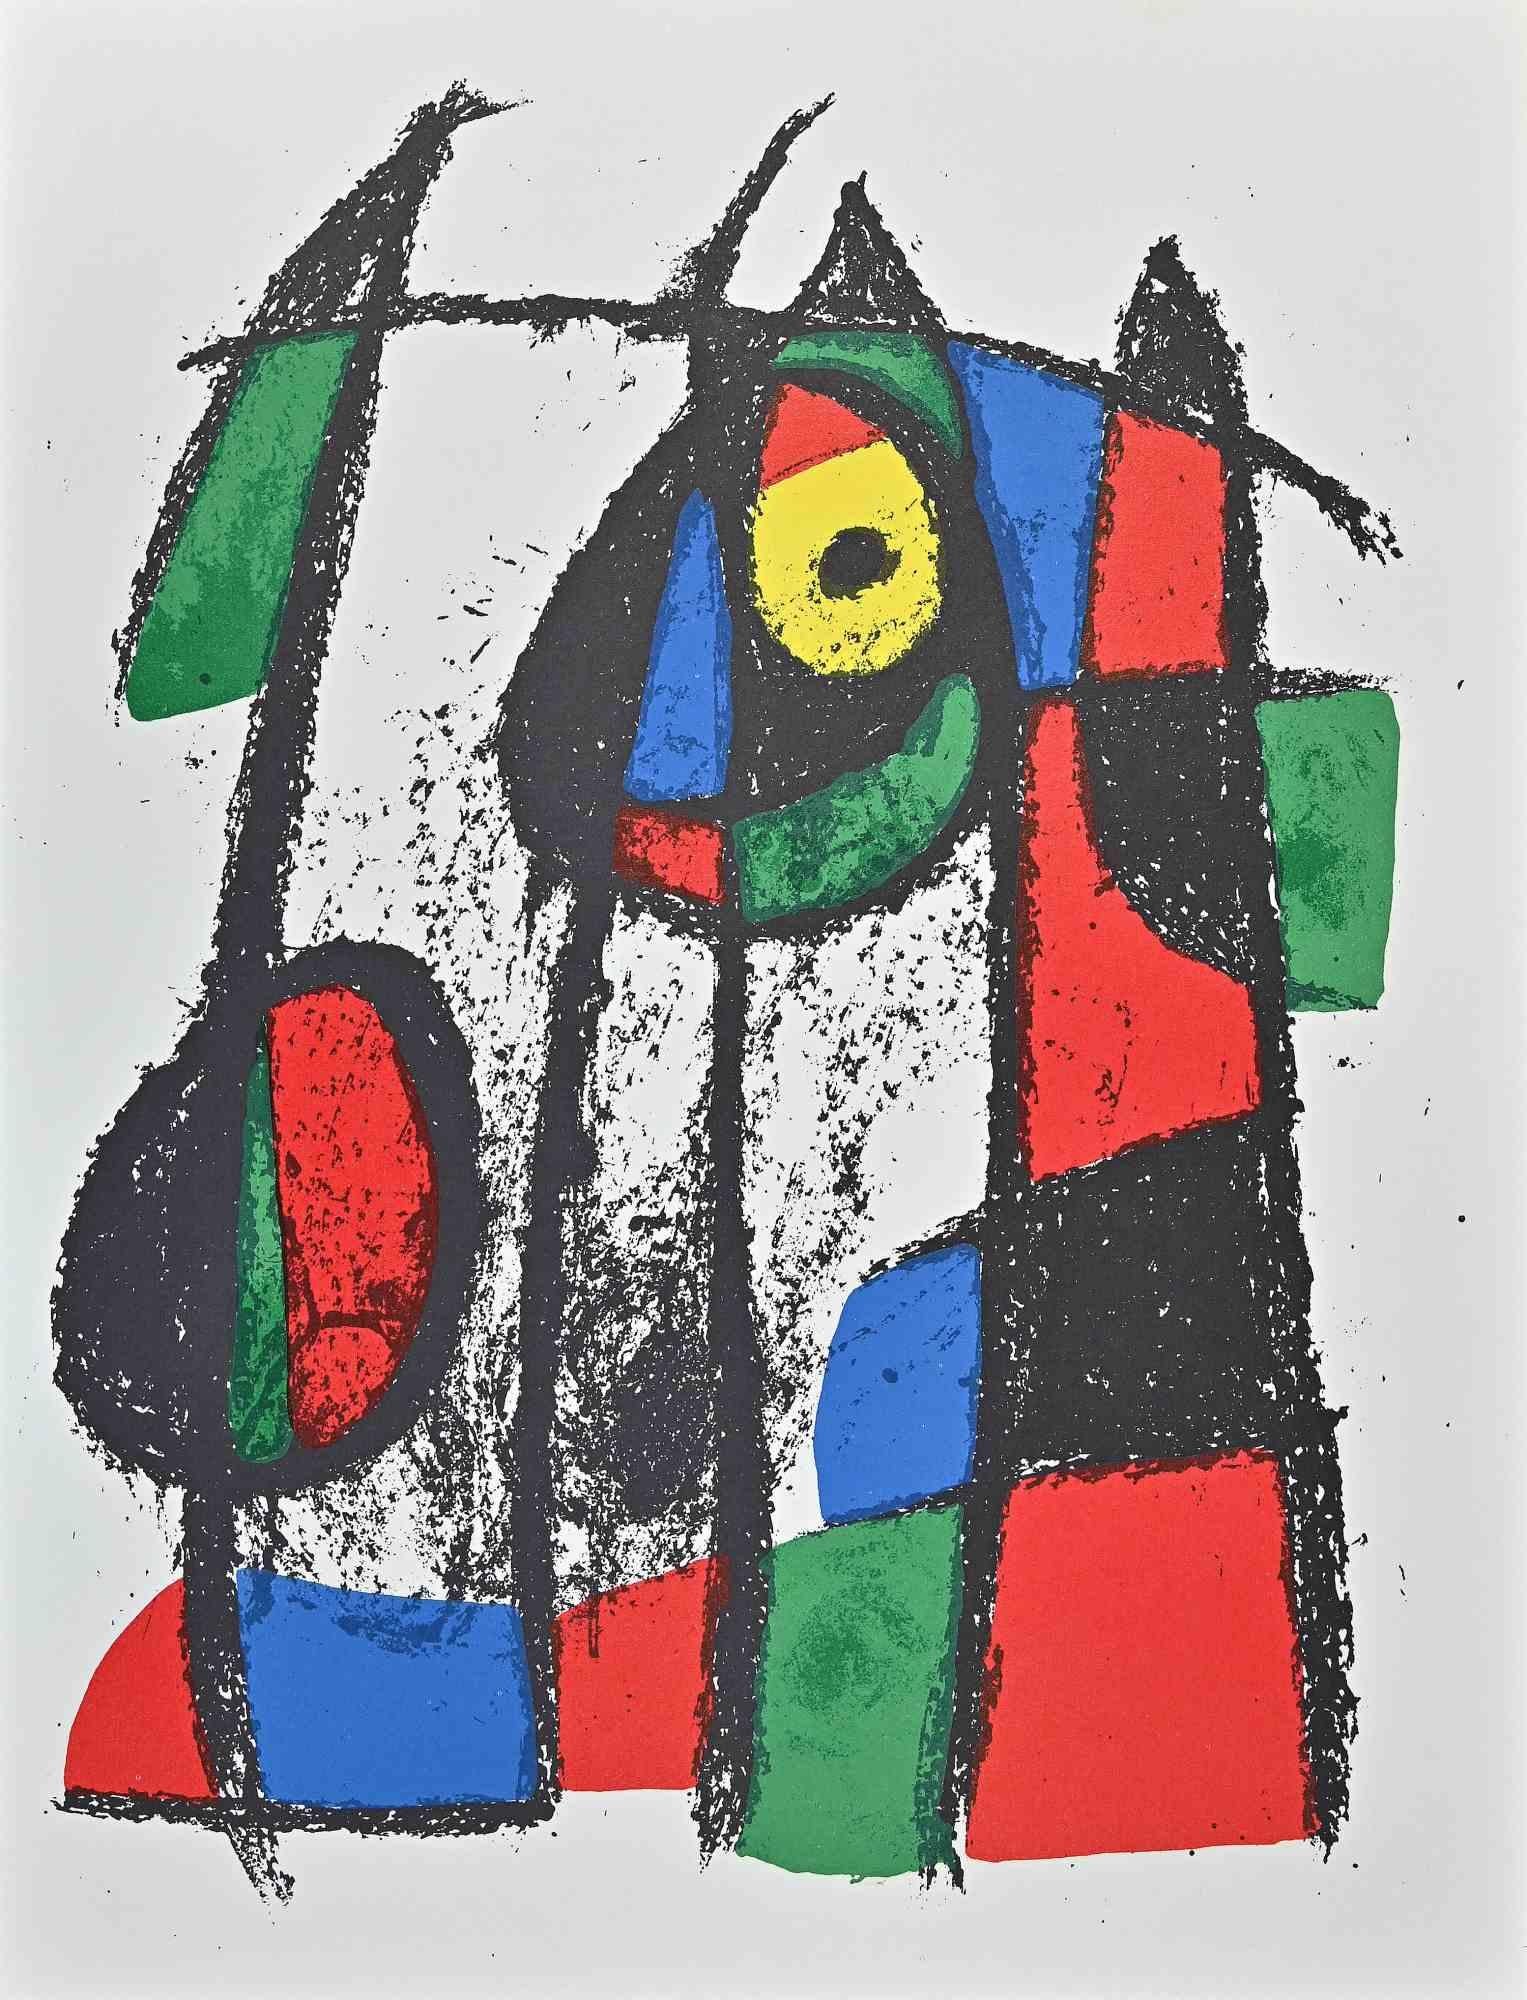 Mirò Lithographe VII is a color lithograph on paper, realized by Joan Miró  for the second volume of his catalog " Mirò Lithographe III "  in 1974. A beautiful plate from a series  composed by an original lithograph for the cover and 11 more